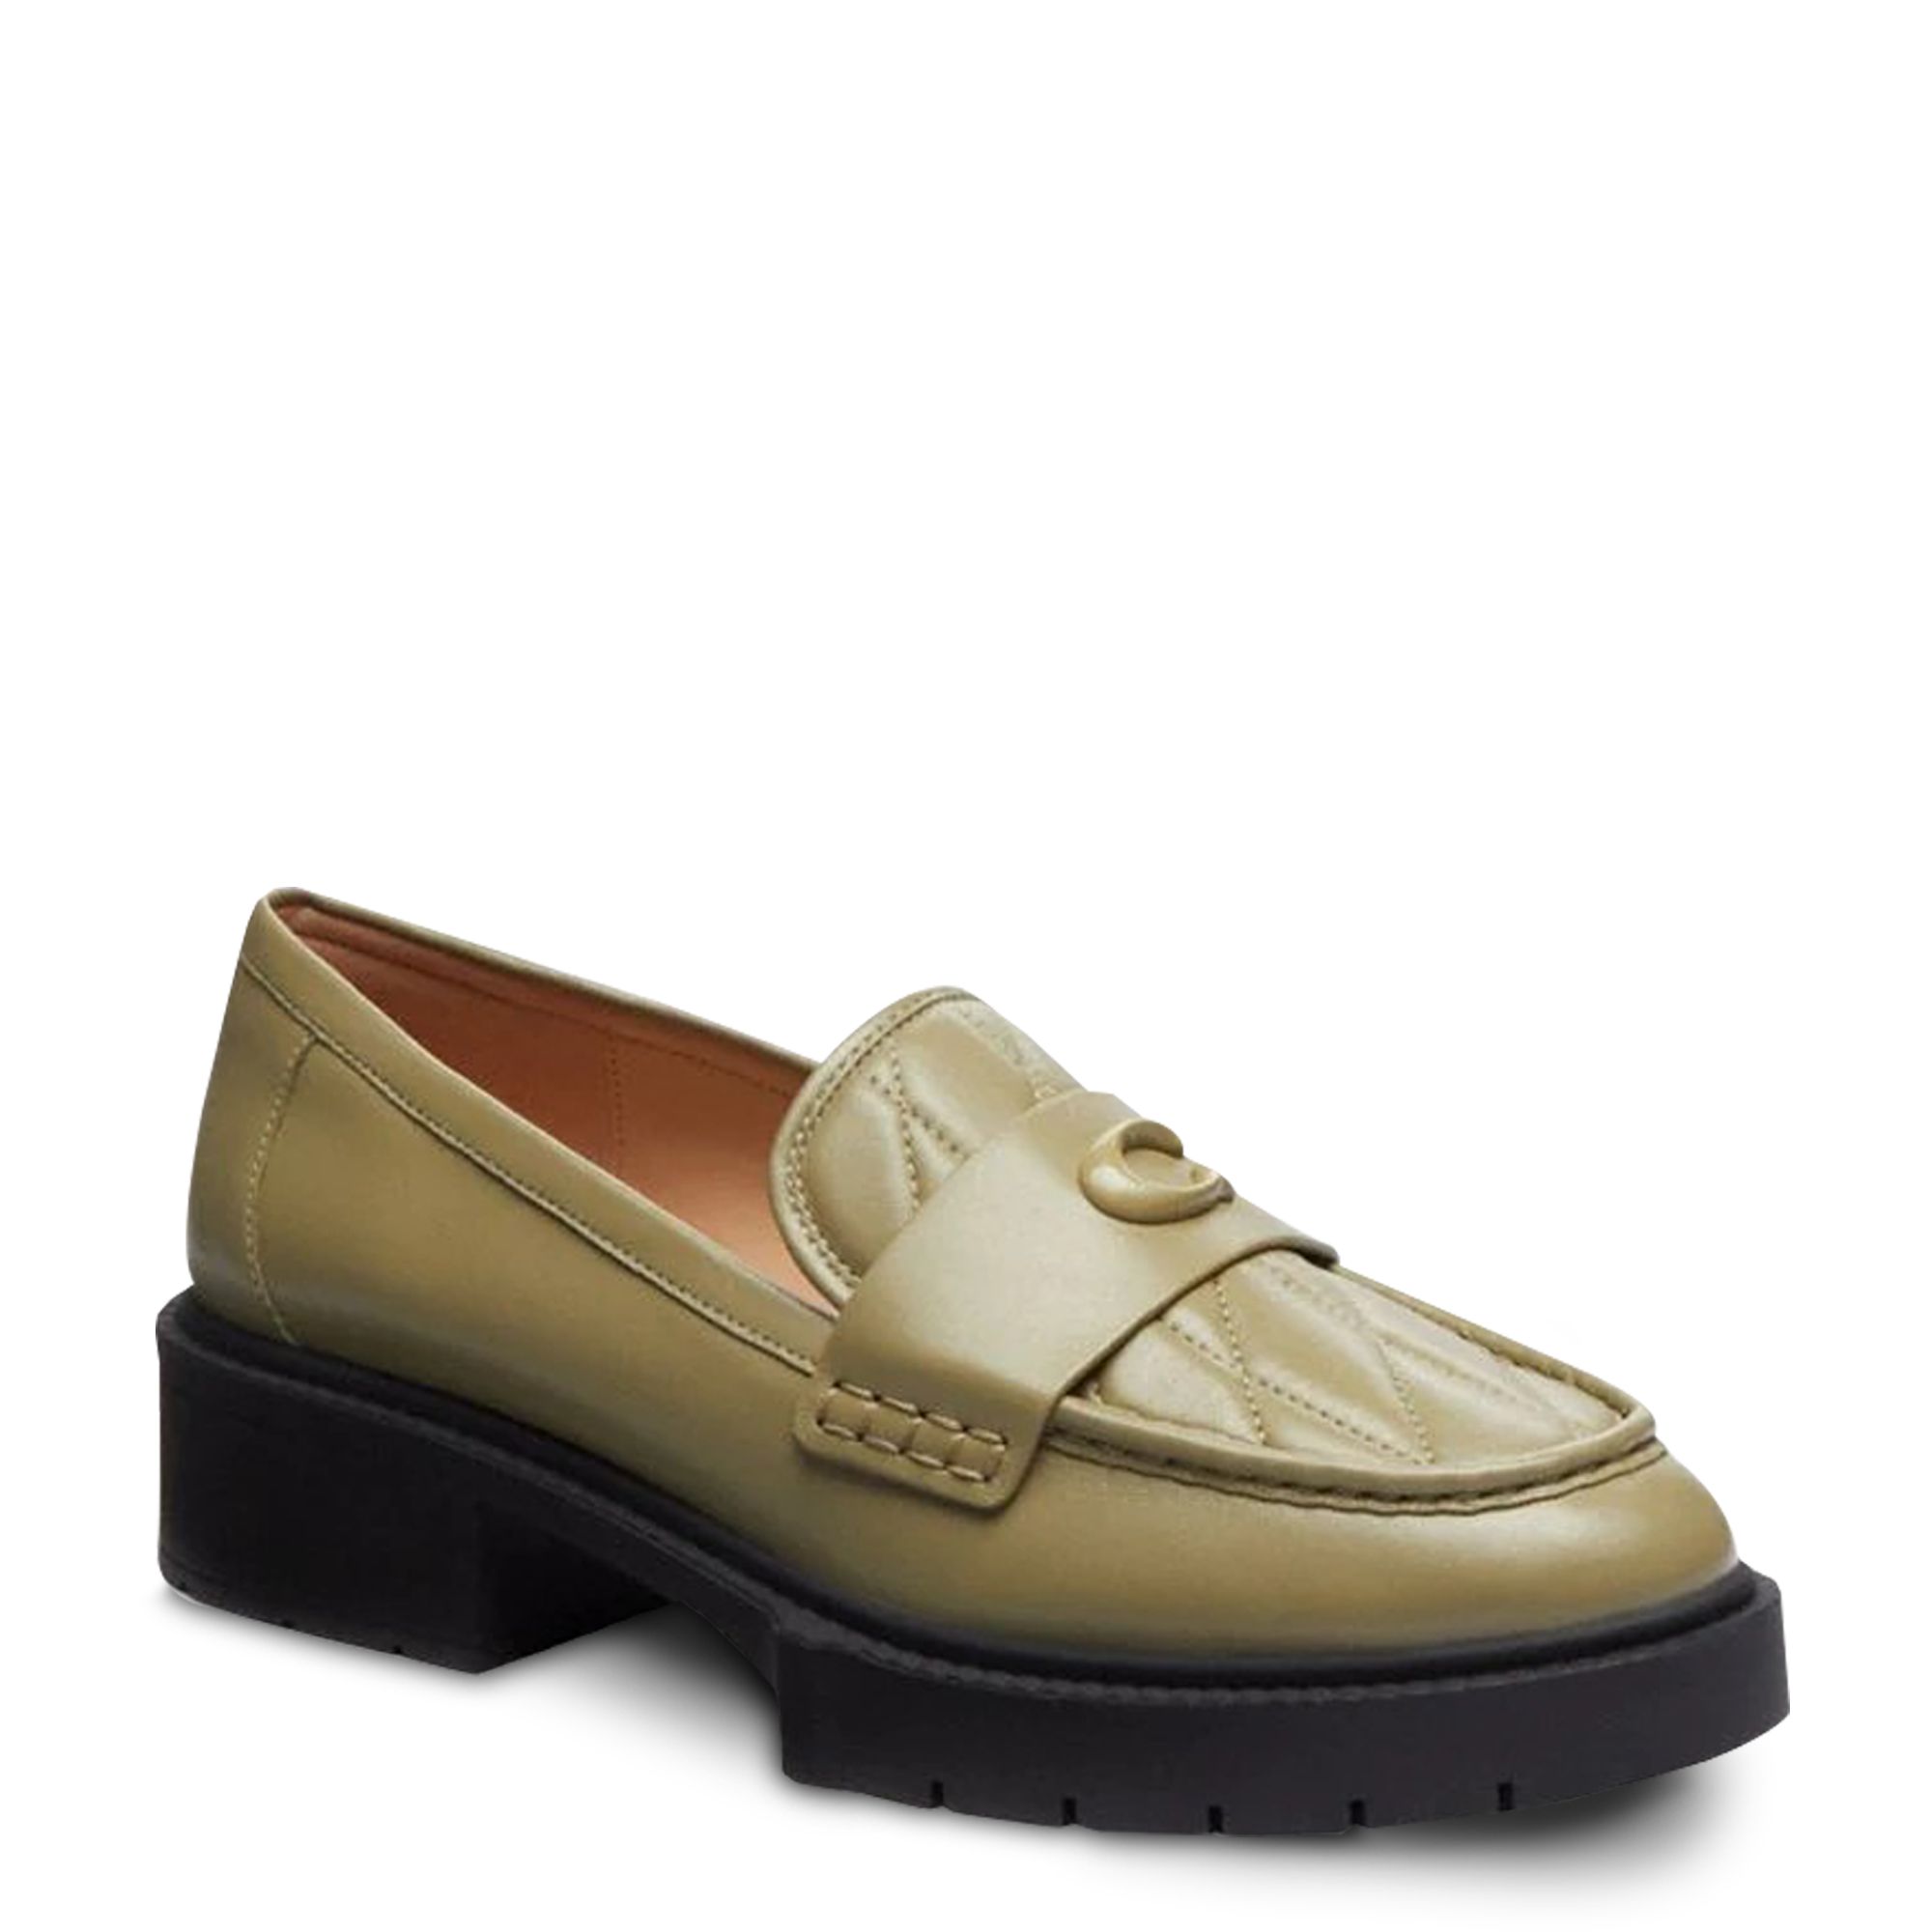 Coach Leah Leather Loafers, Moss